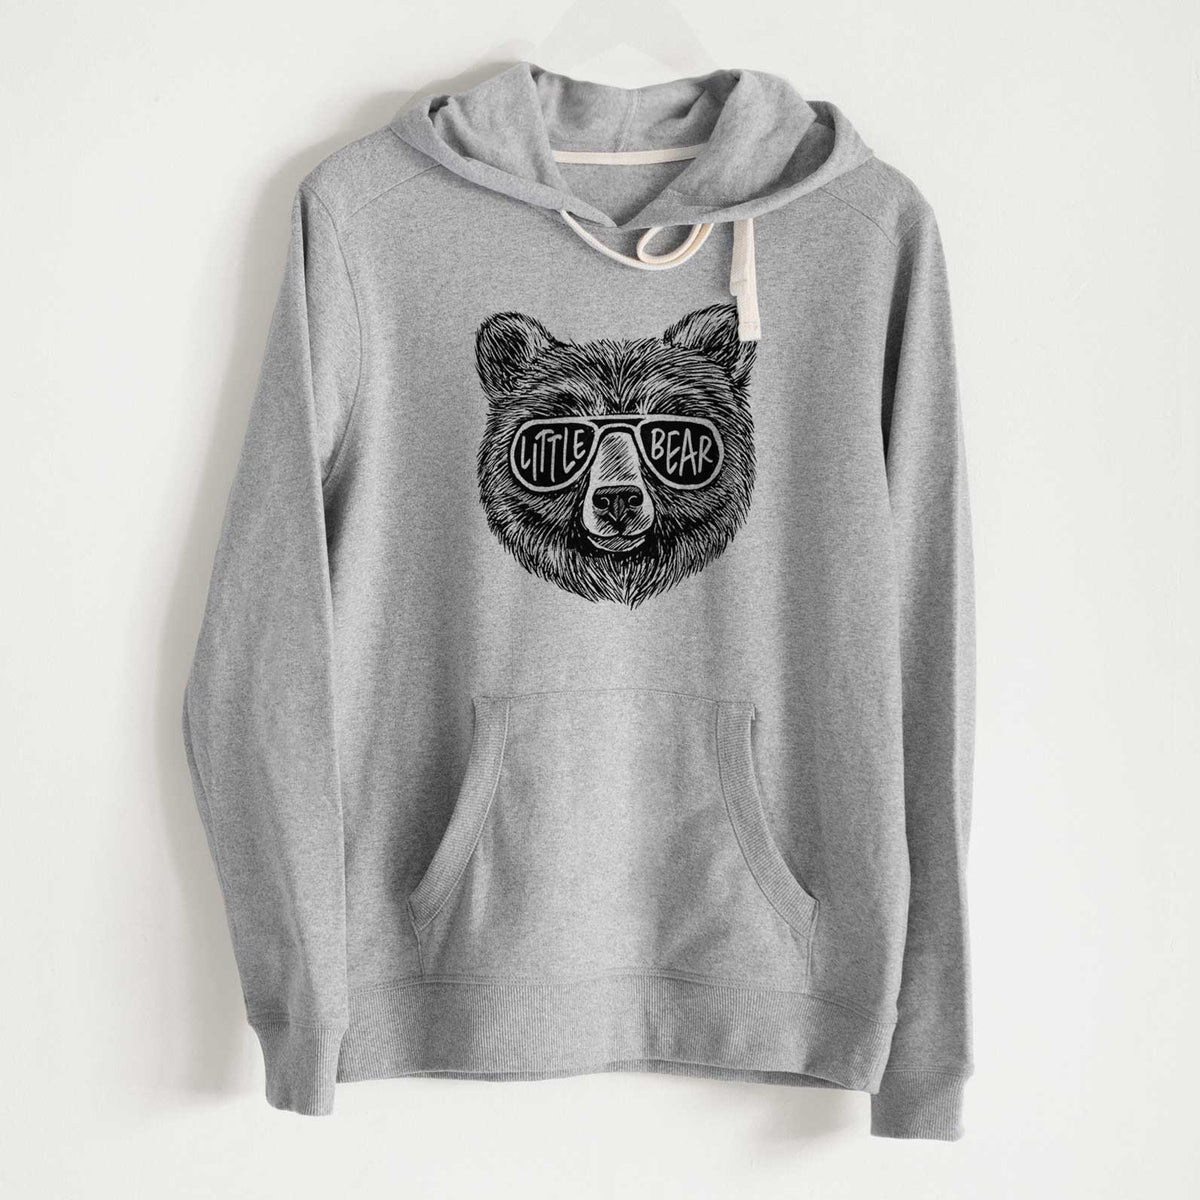 Little Bear - Unisex Recycled Hoodie - CLOSEOUT - FINAL SALE